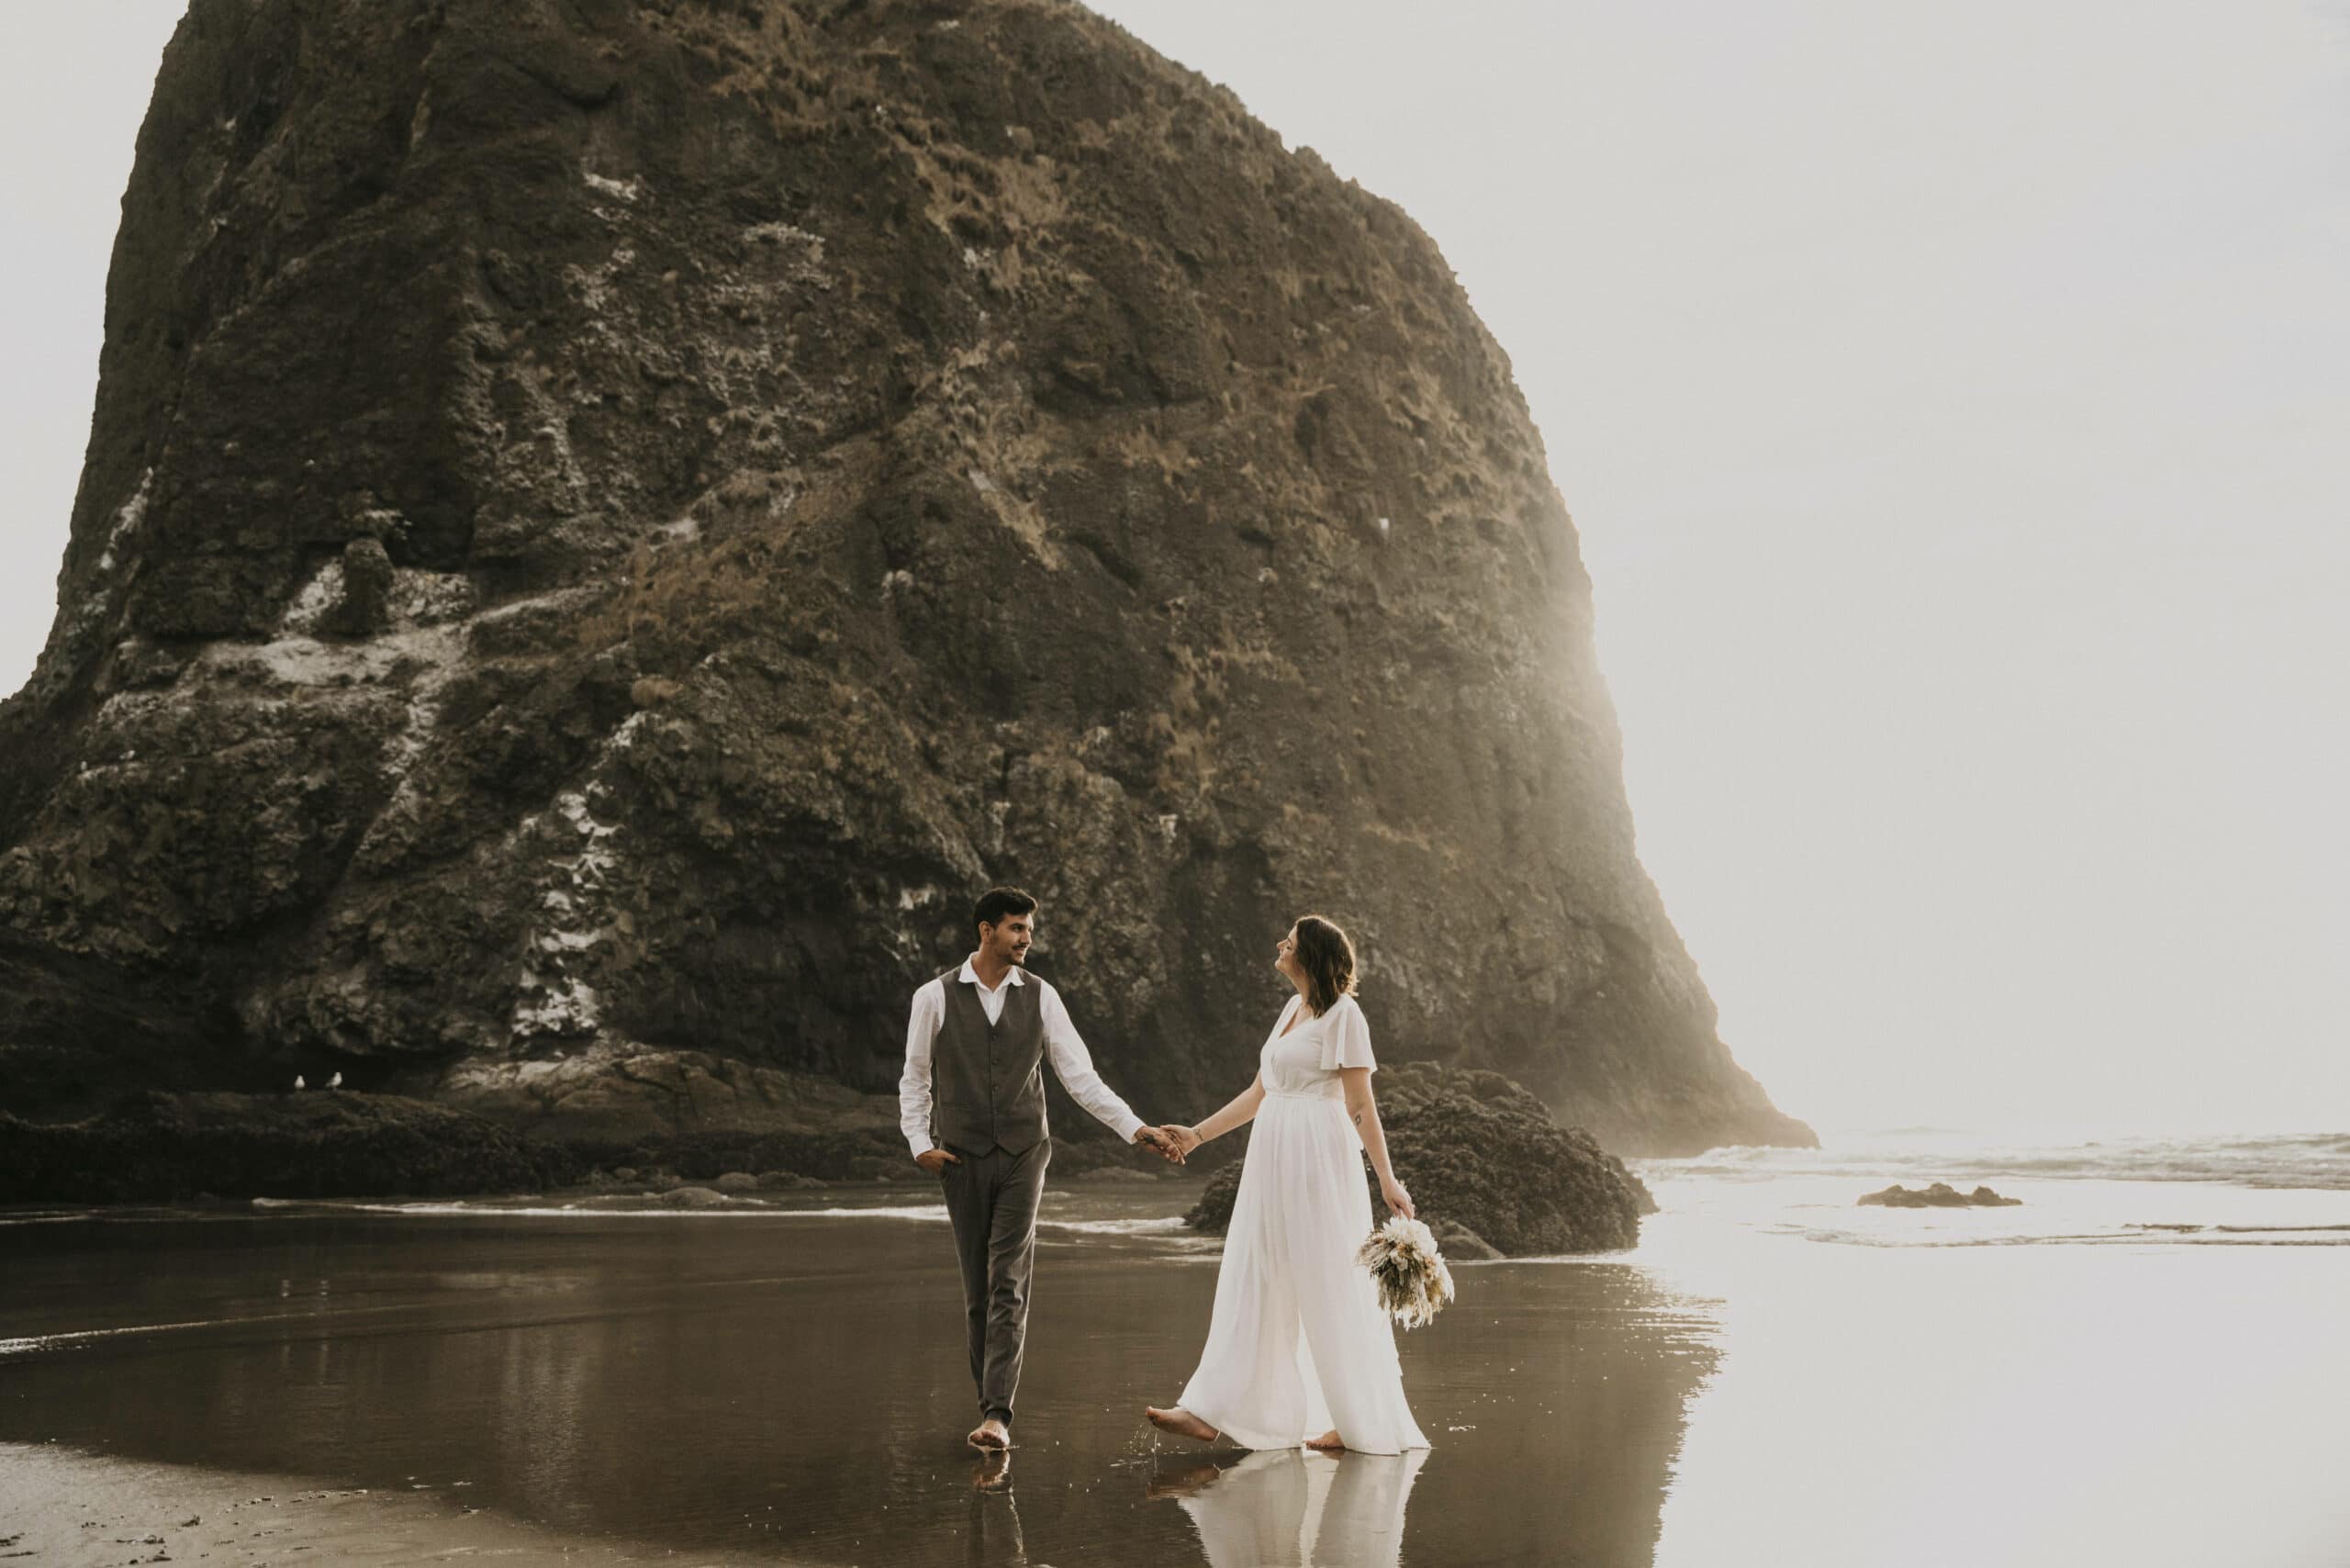 Cannon beach elopement with bride and groom at sunset in Oregon